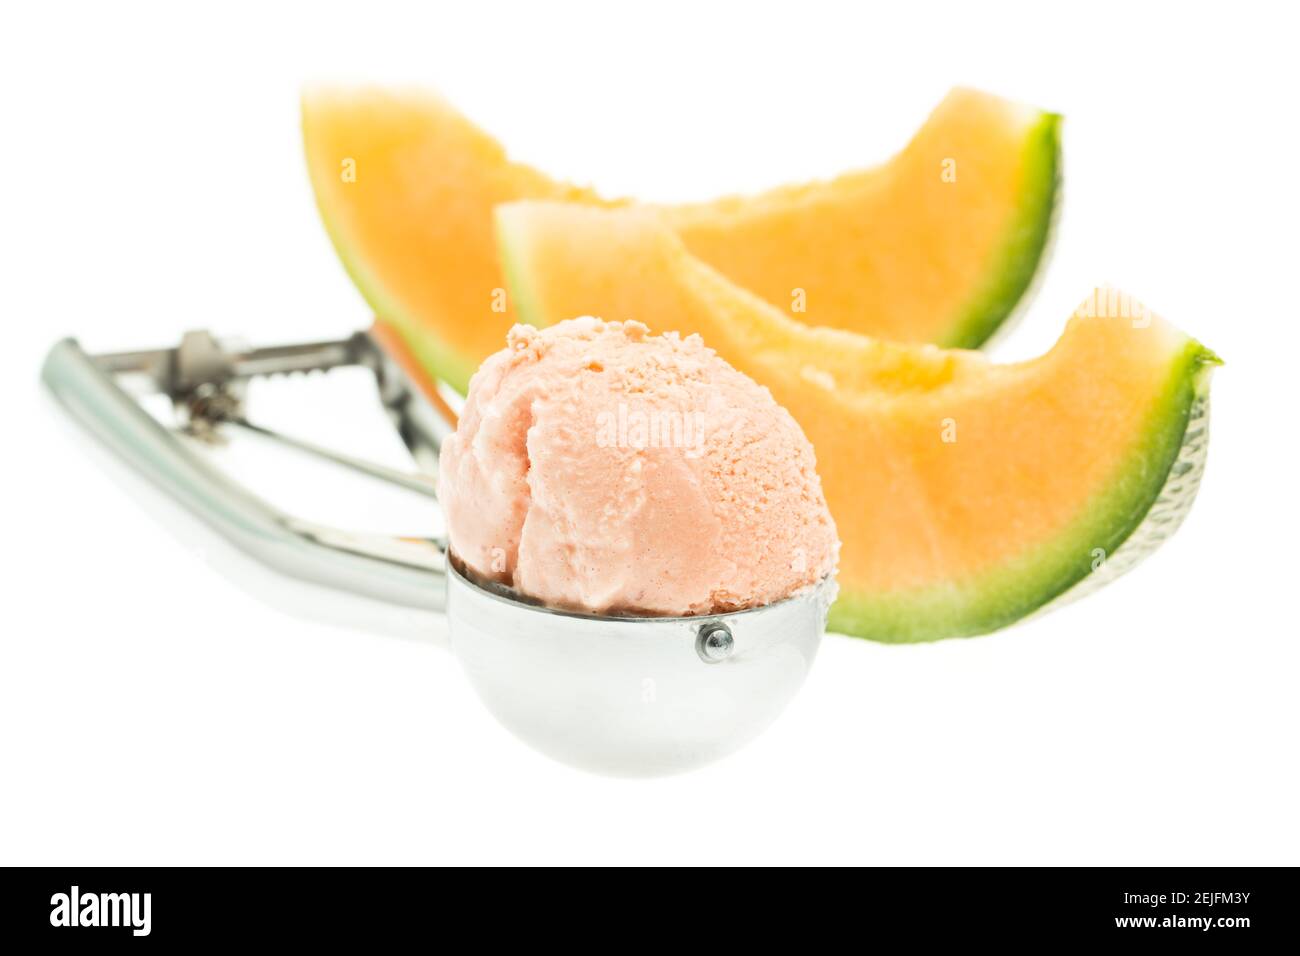 Melon ice cream scoop with melon isolated on white background with spoon Stock Photo